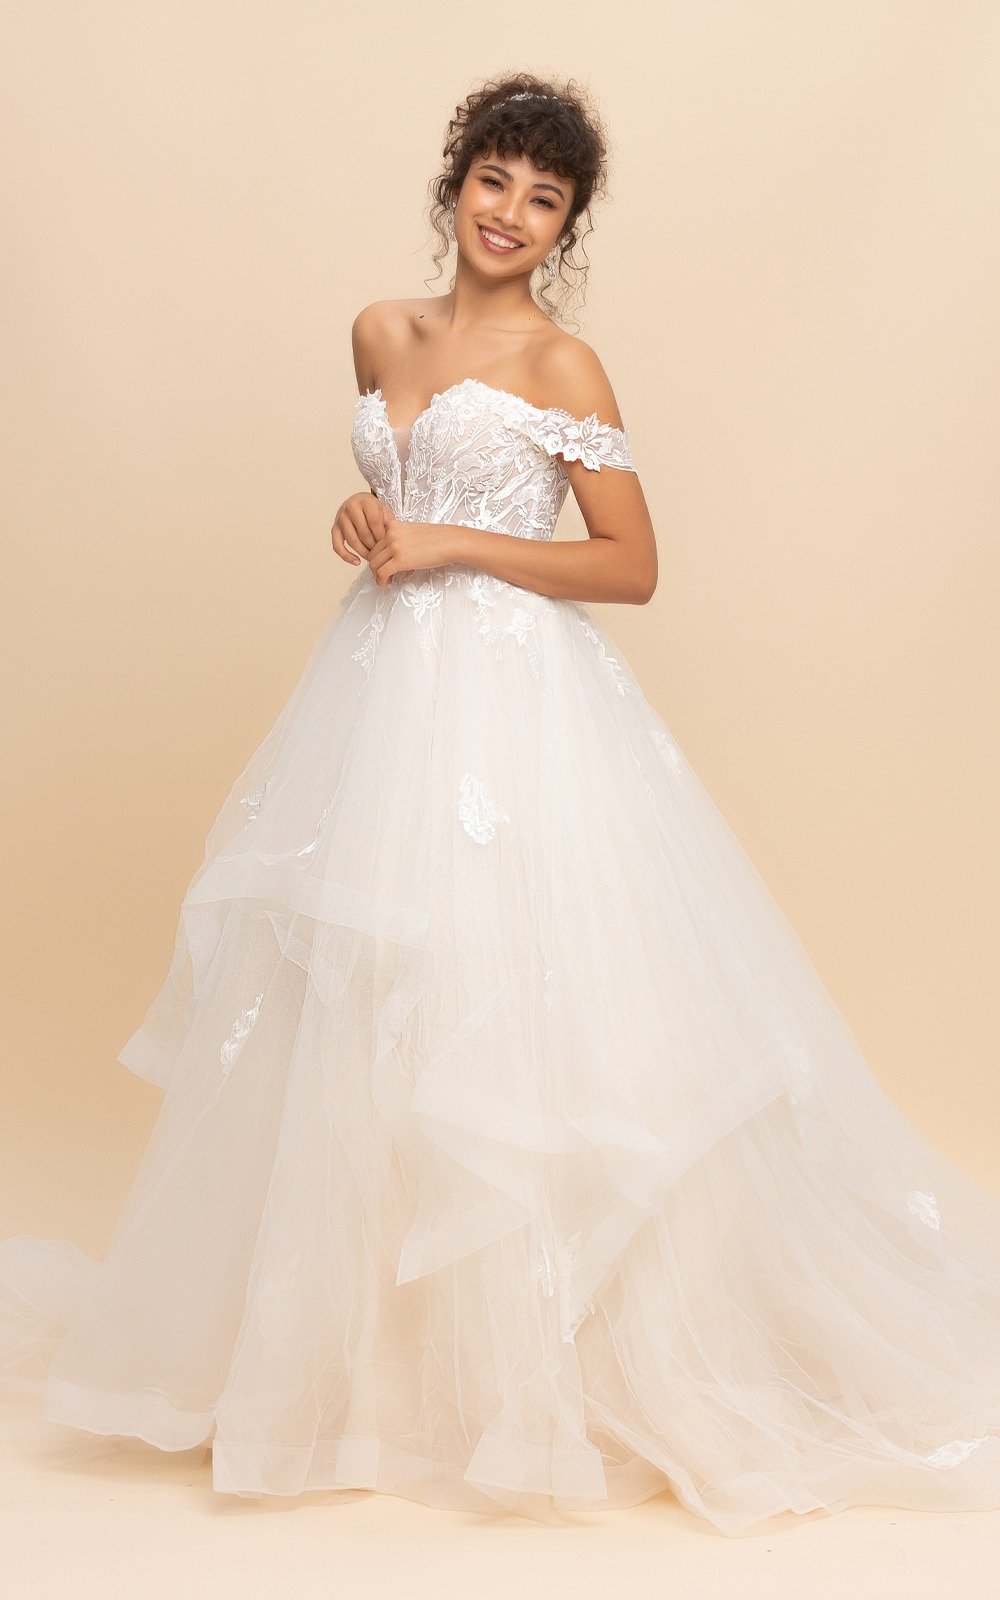 The Una an affordable wedding gown from Afarose